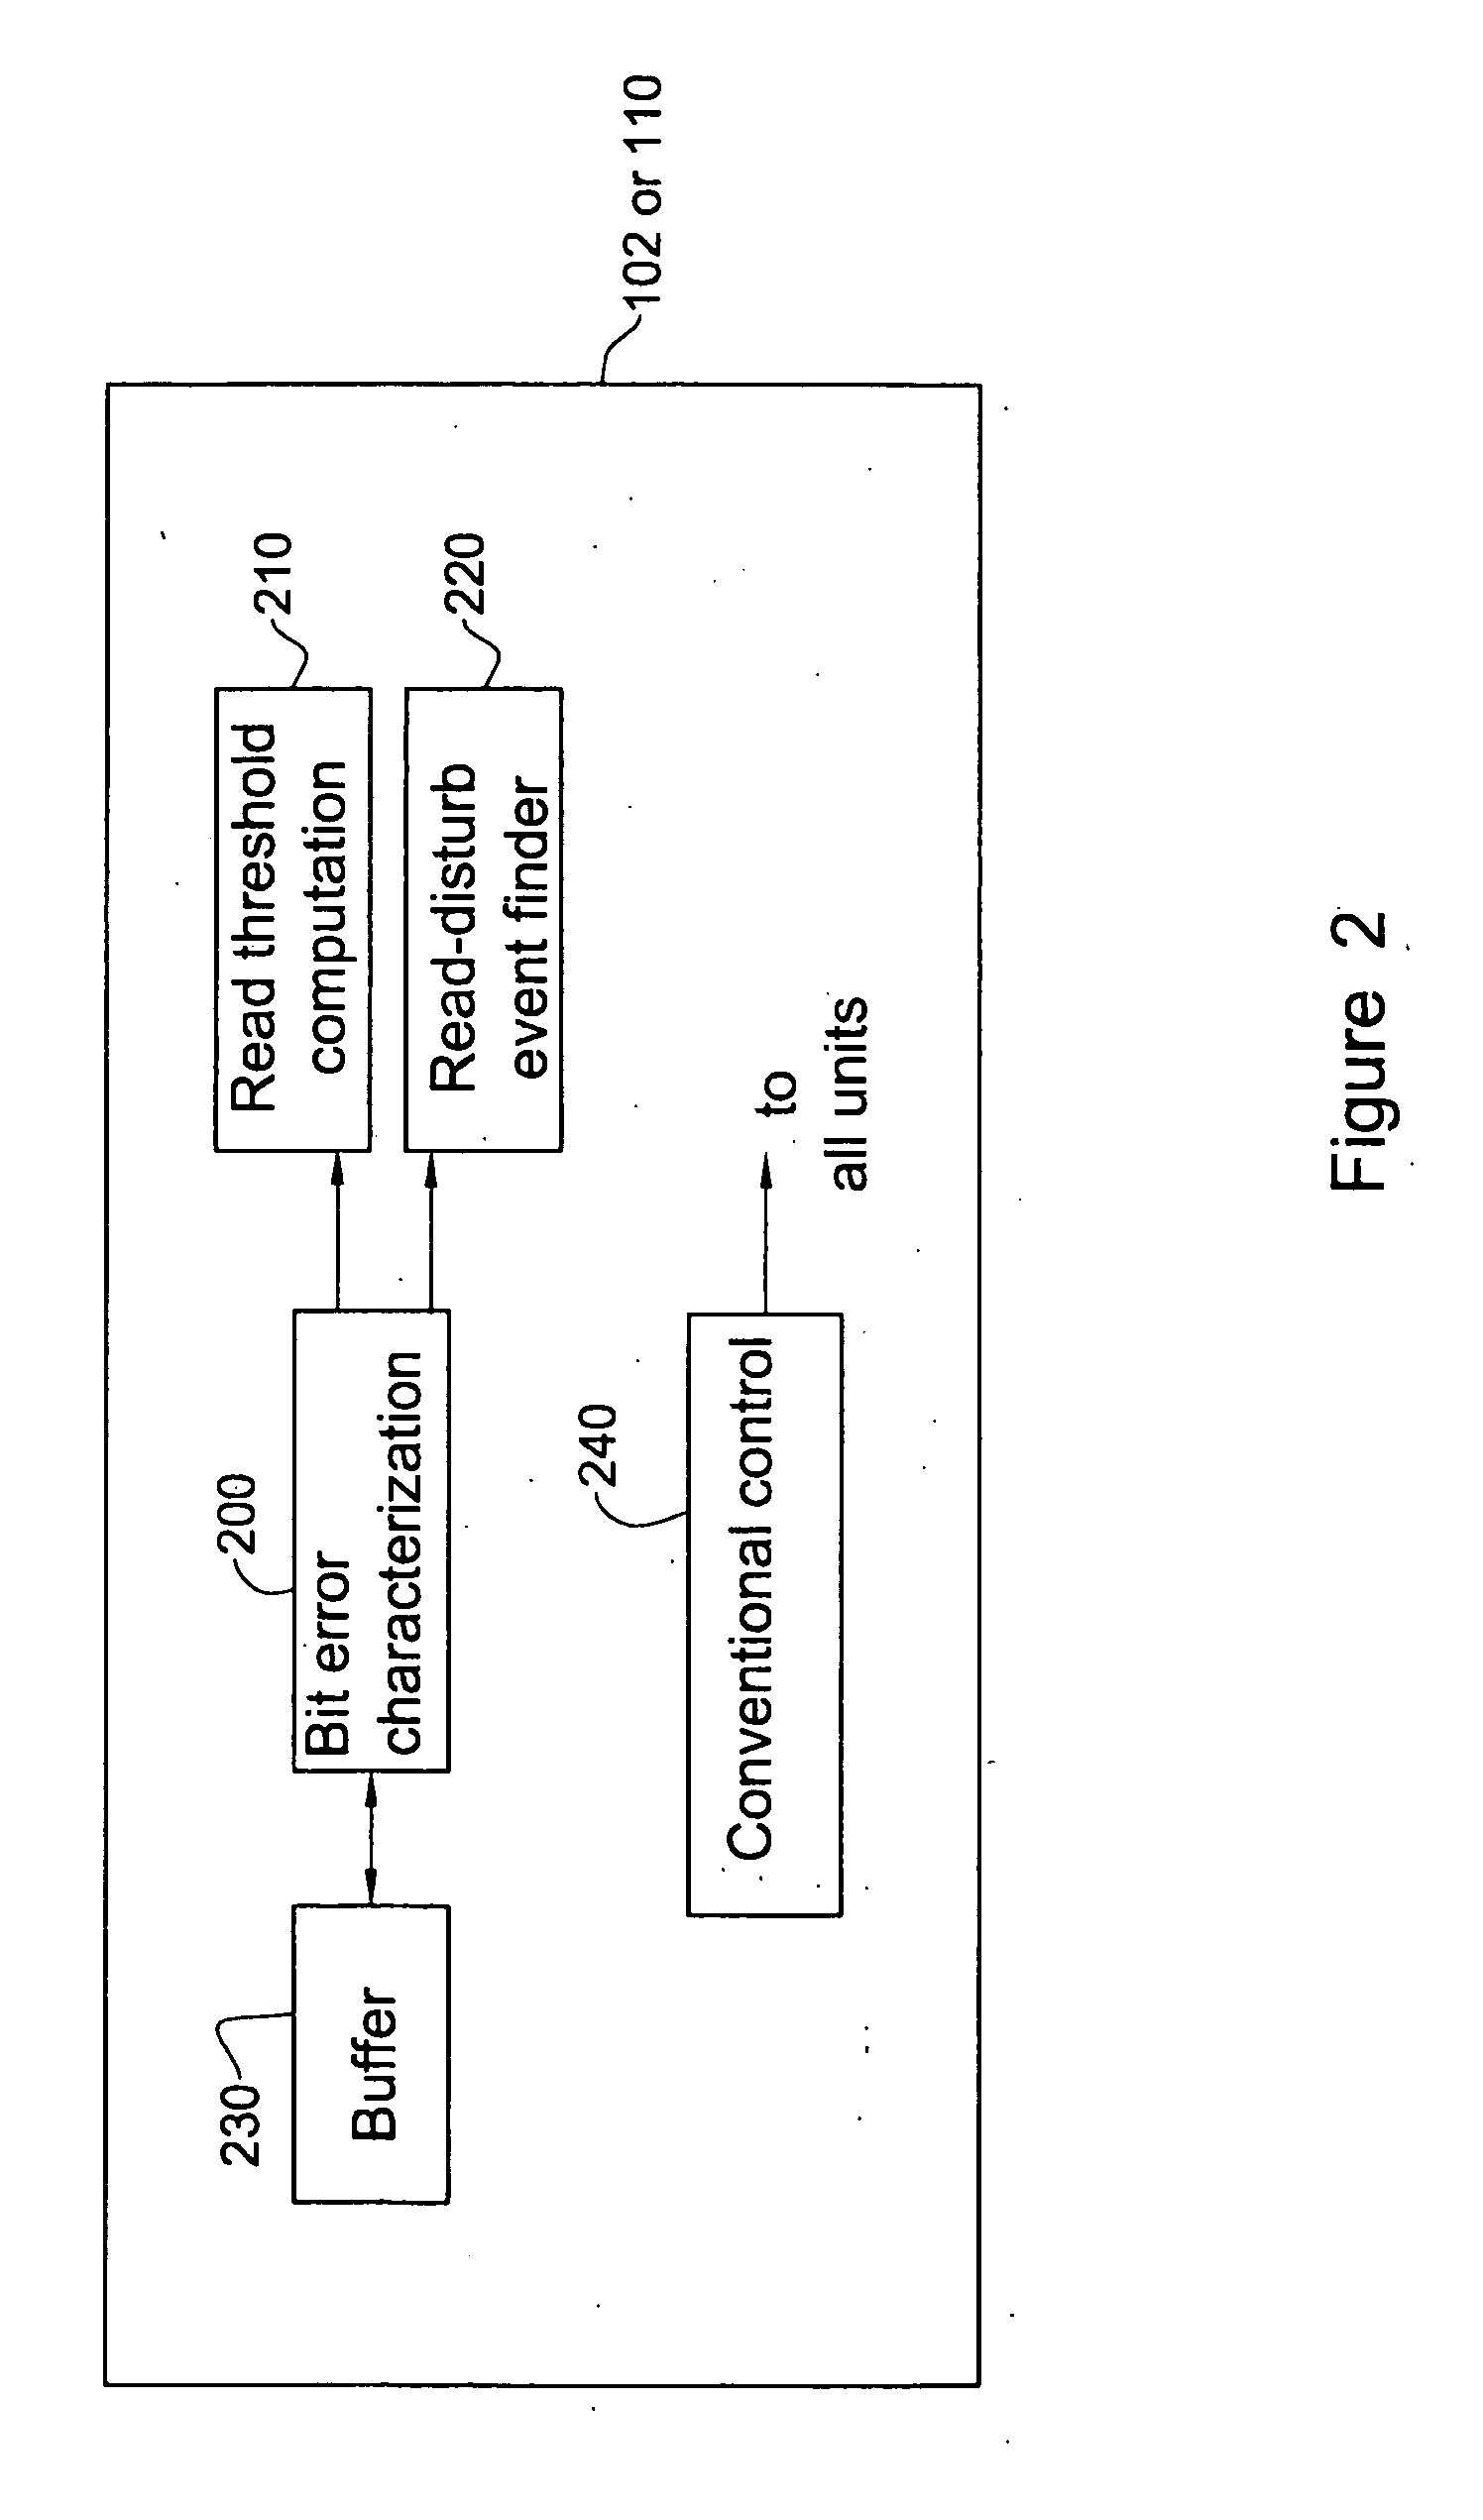 Apparatus and methods for generating row-specific reading thresholds in flash memory